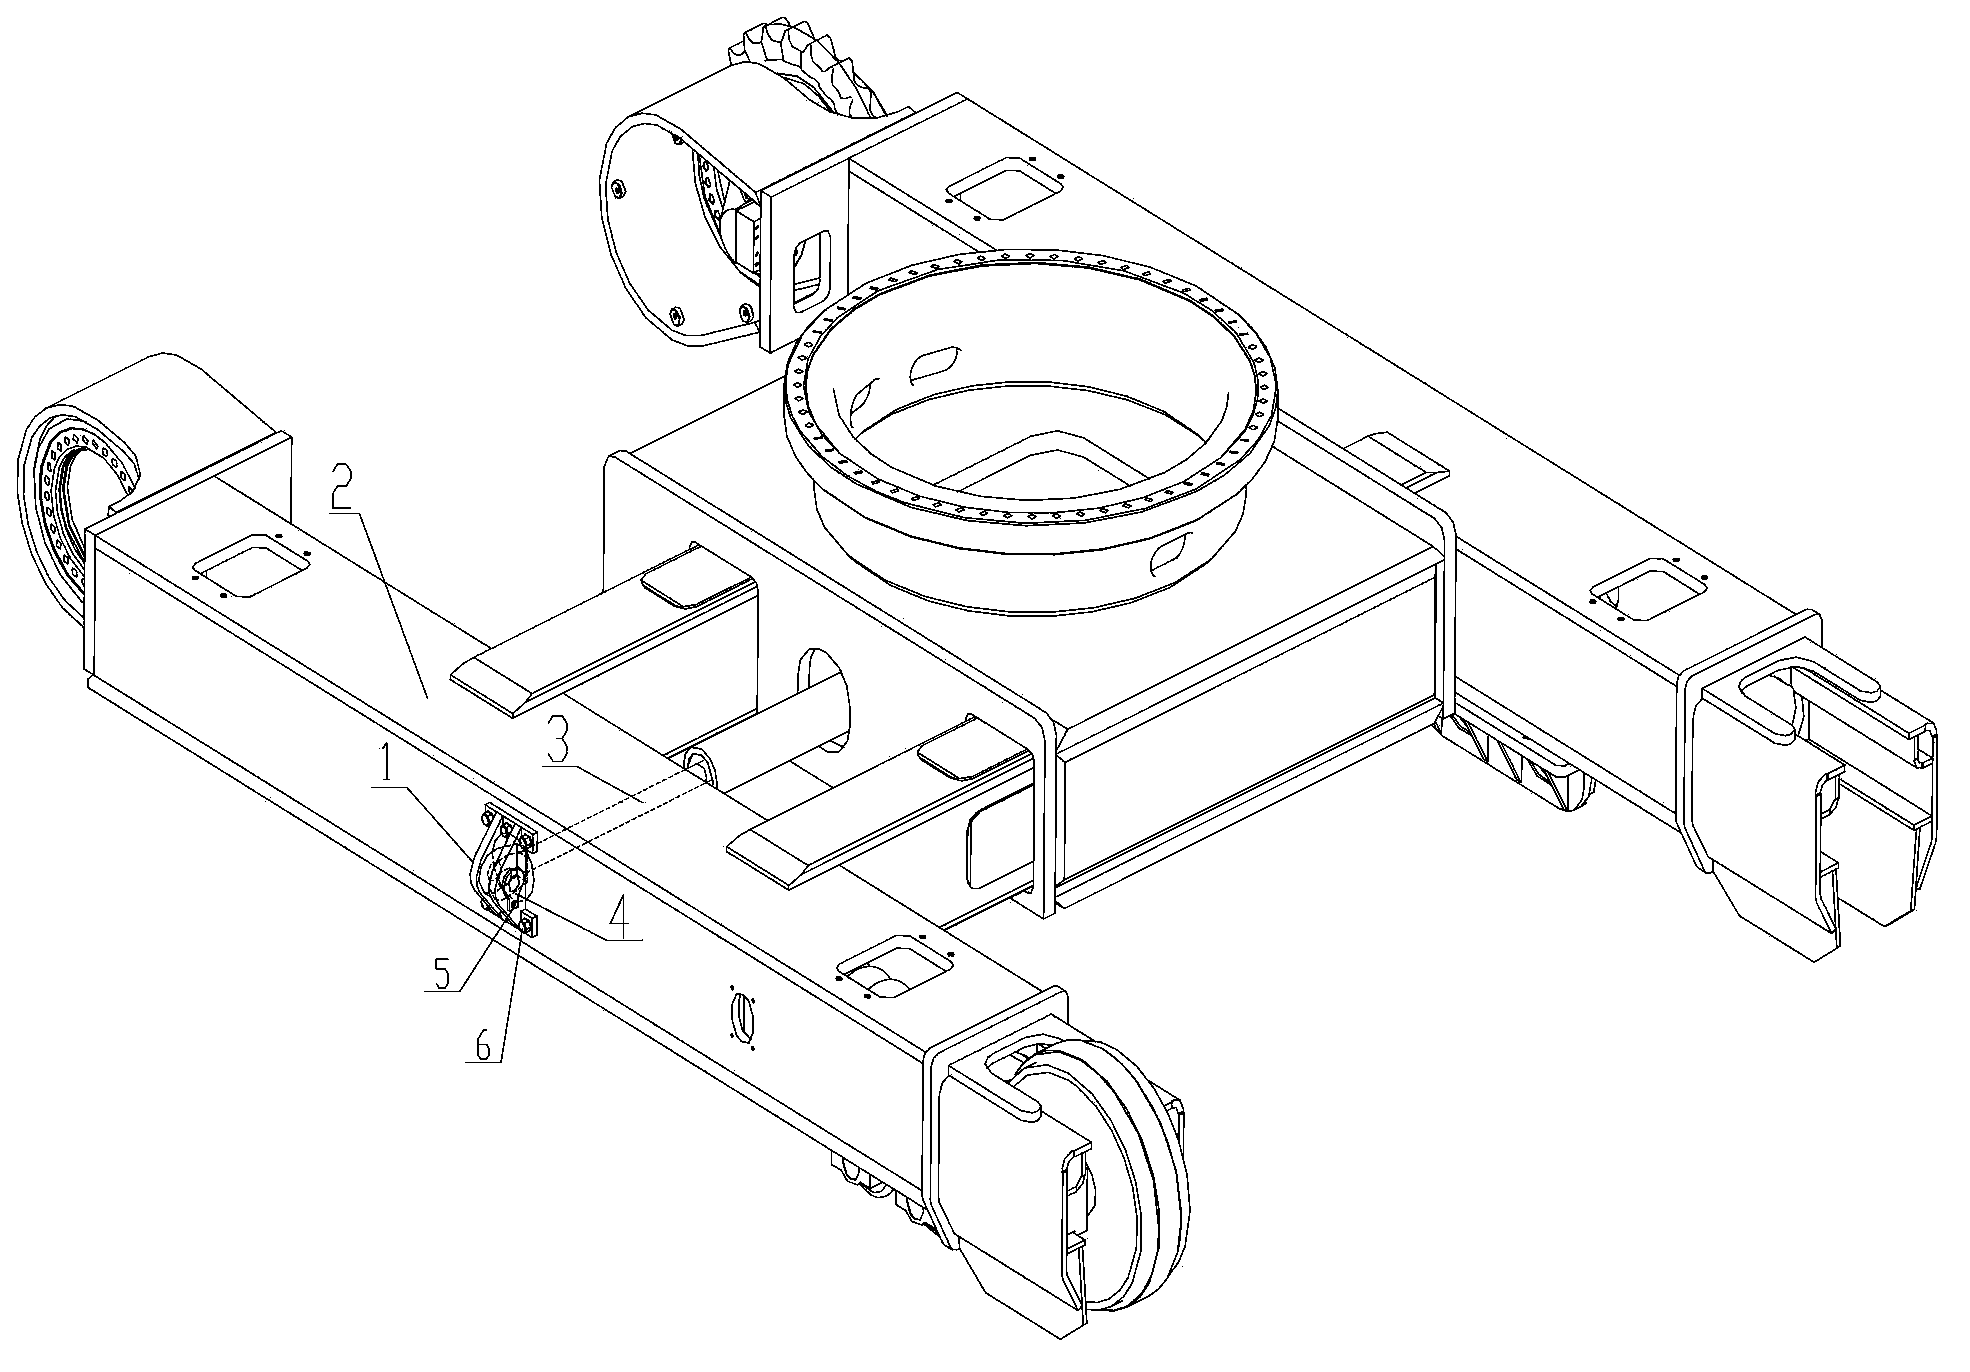 Travelling frame, travelling device and engineering machinery